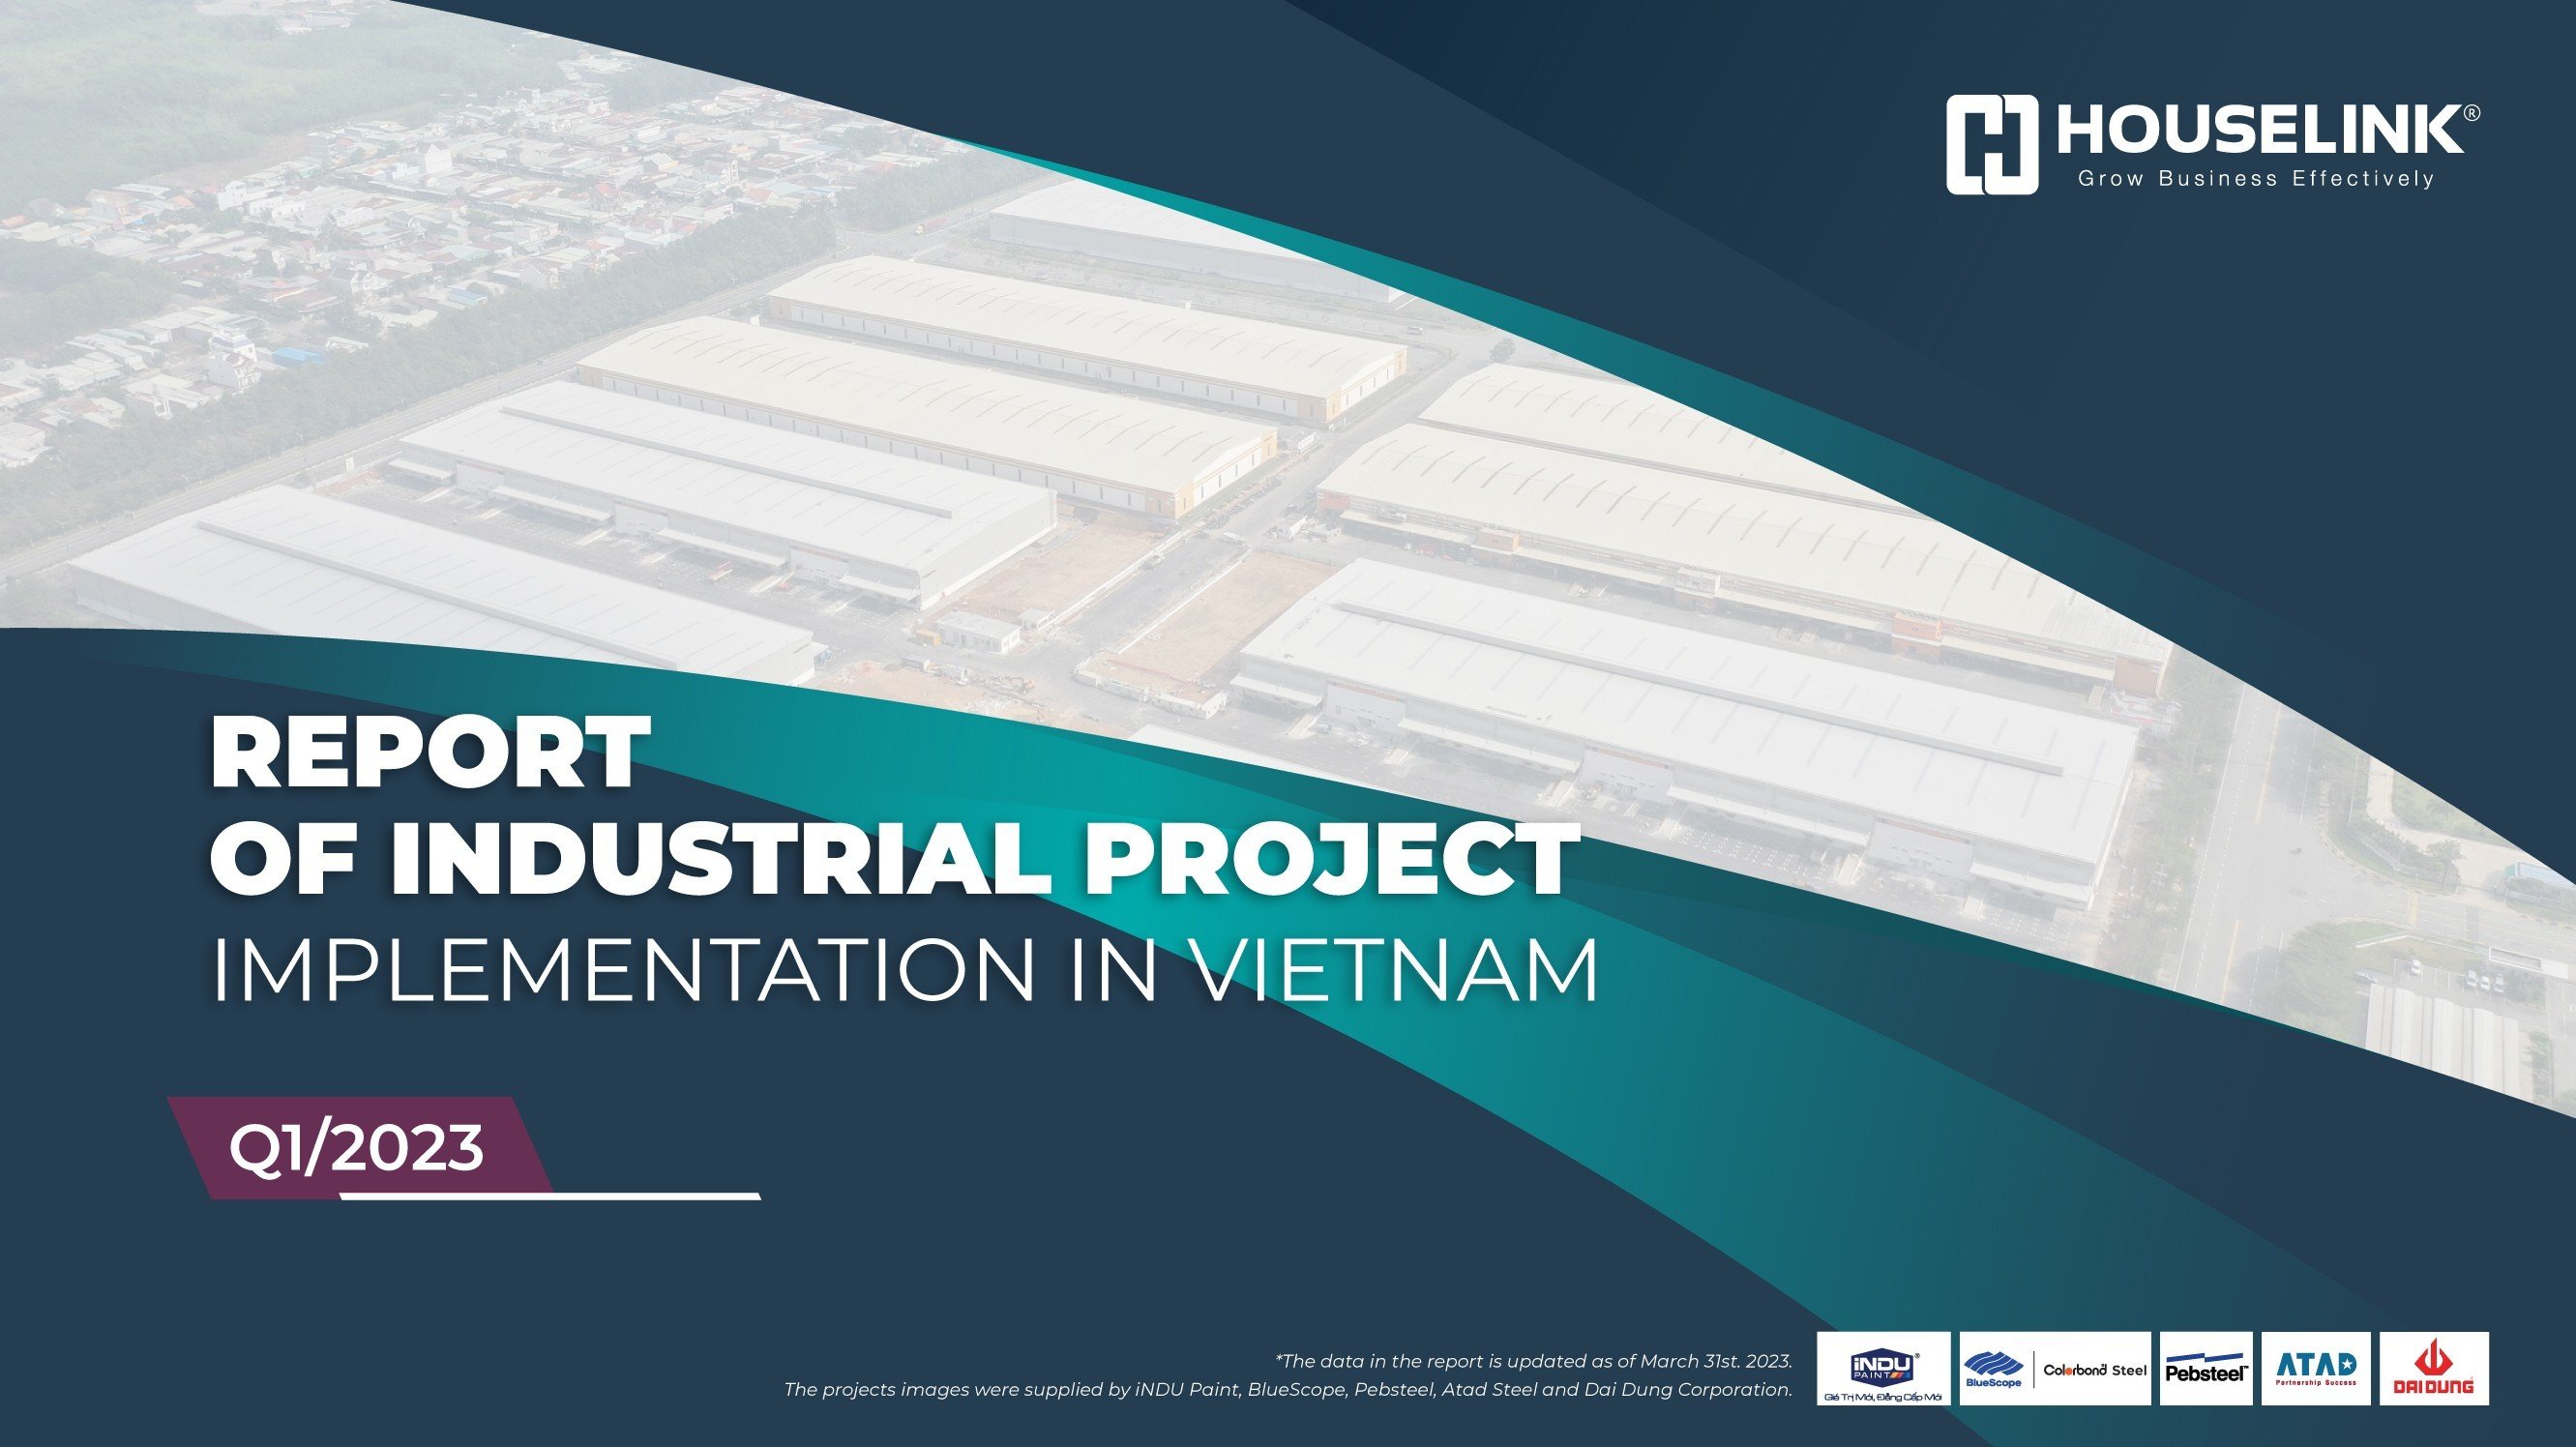 Report of Industrial Project Implementation in Viet Nam Q1/2023